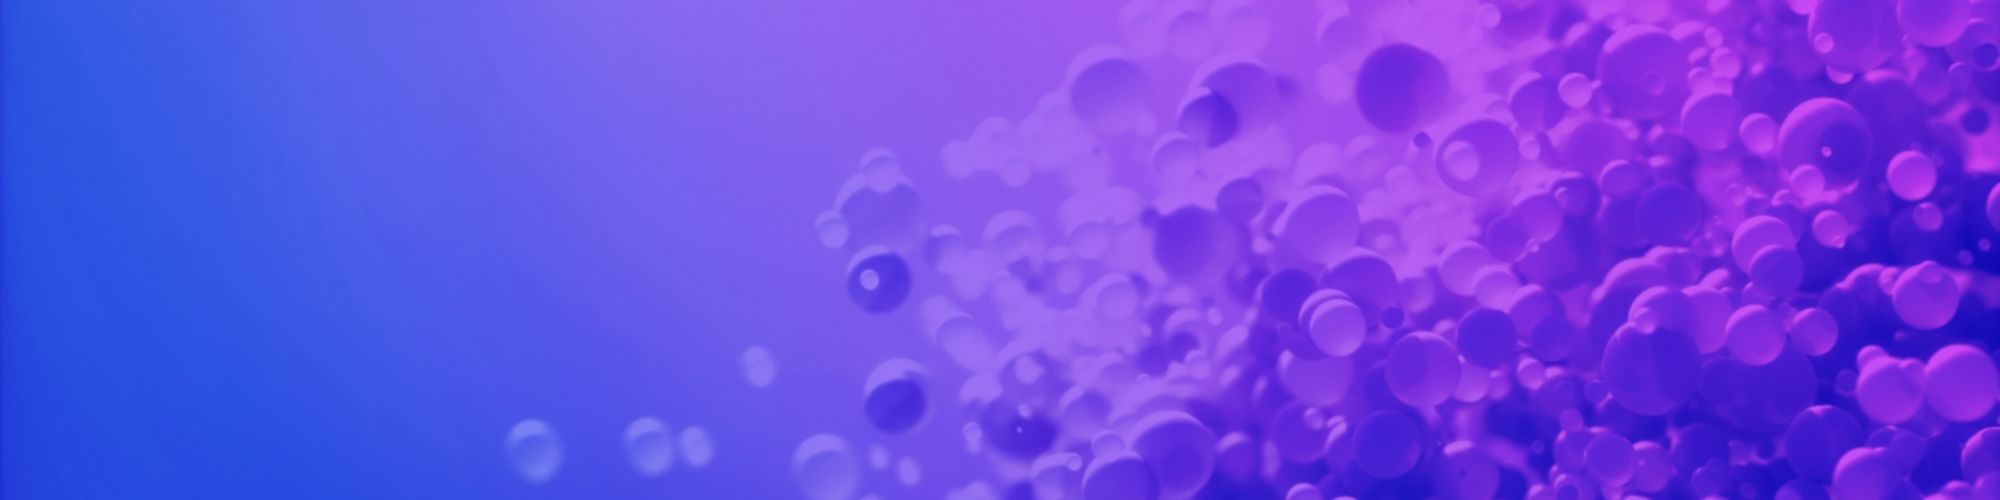 bubbles-abstract-banner